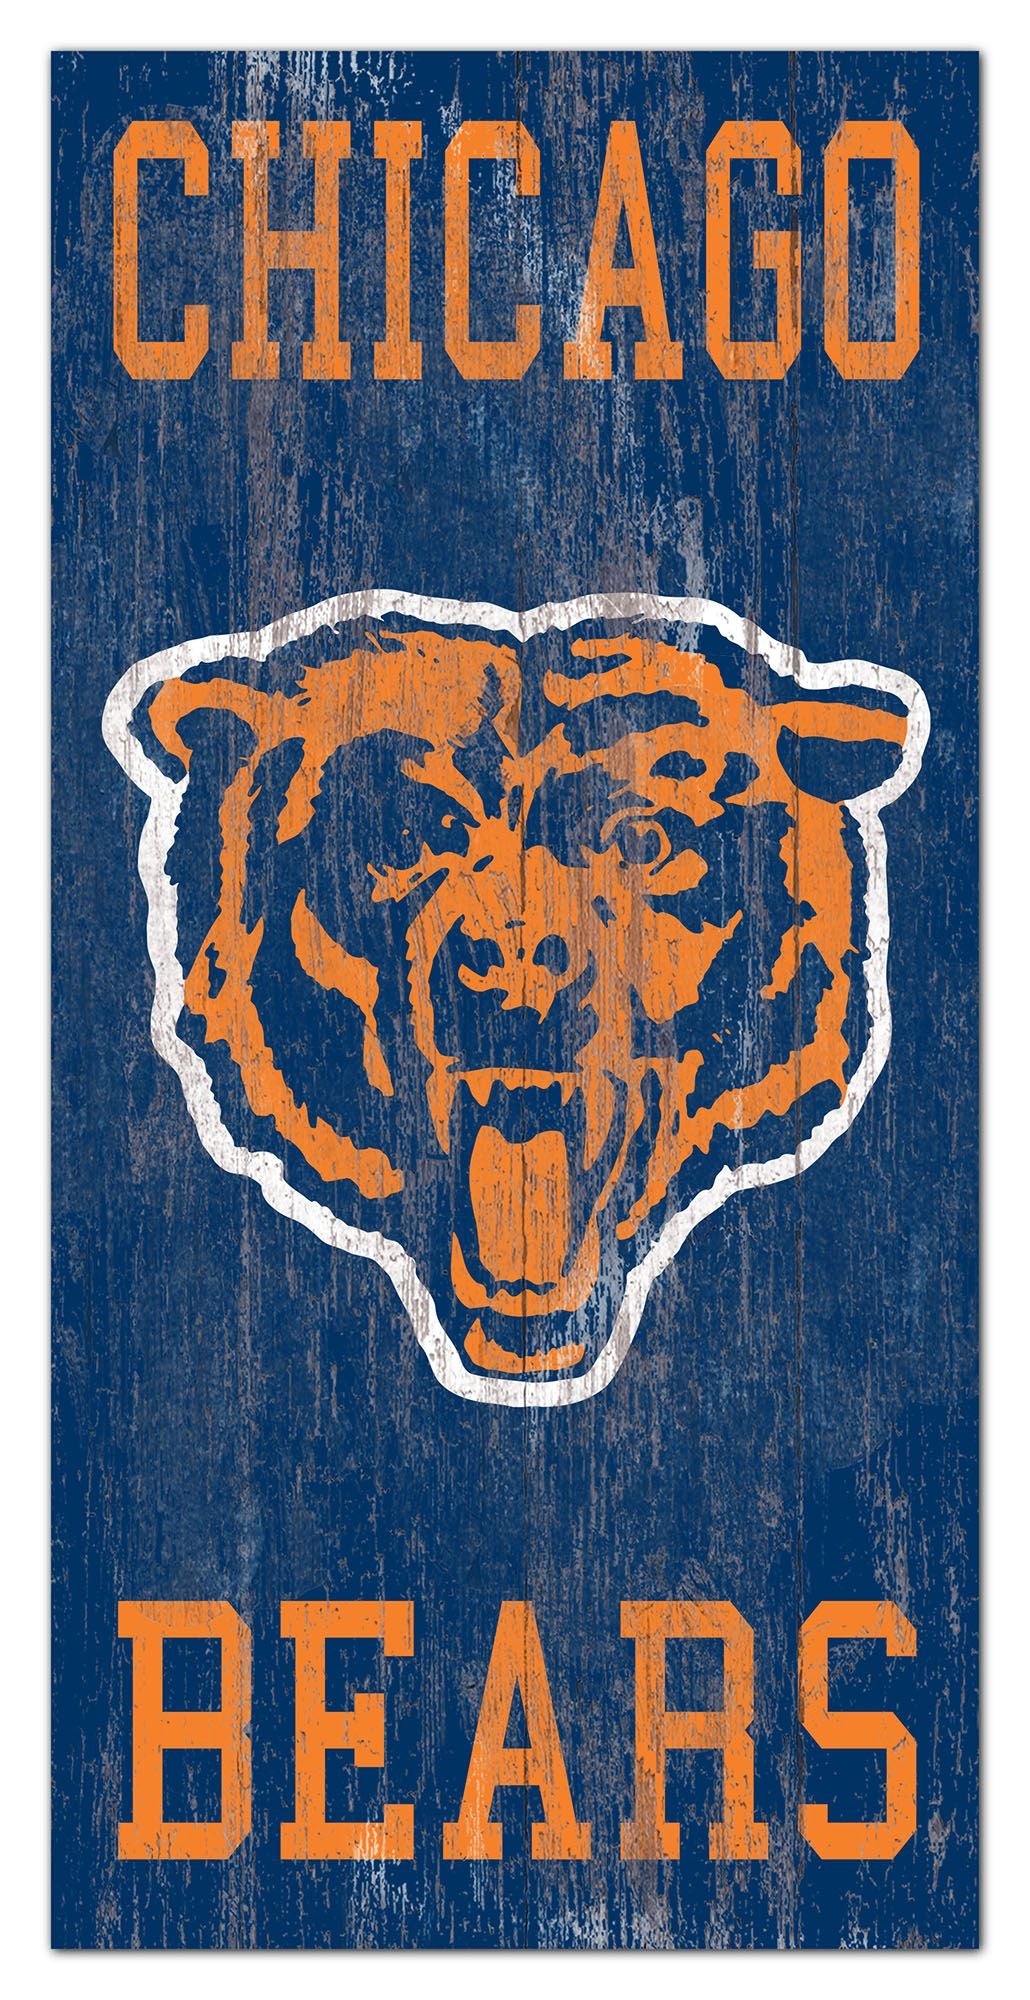 Chicago Bears Heritage Logo w/ Team Name 6" x 12" Distressed Sign by Fan Creations